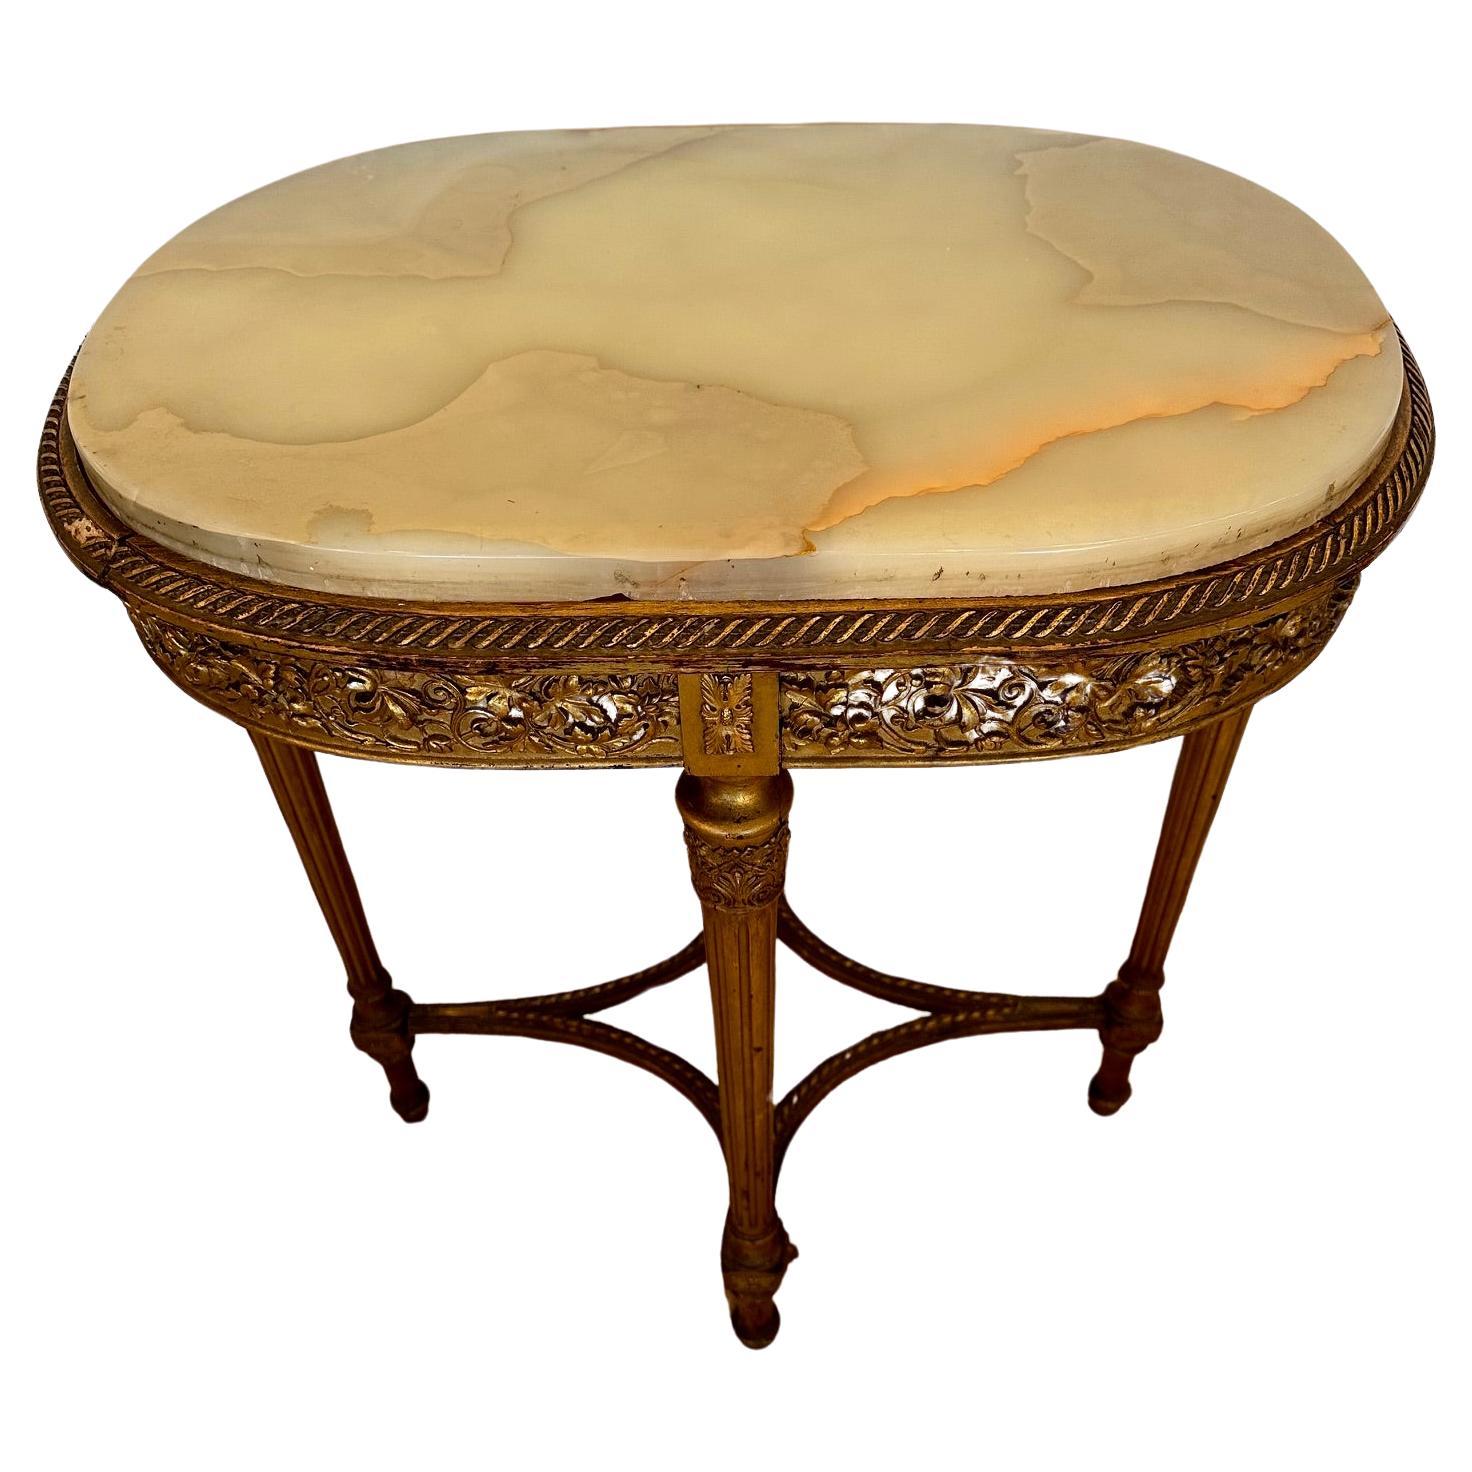 Ornate French Louis XVI Style Giltwood Oval Side Table with Marble Top